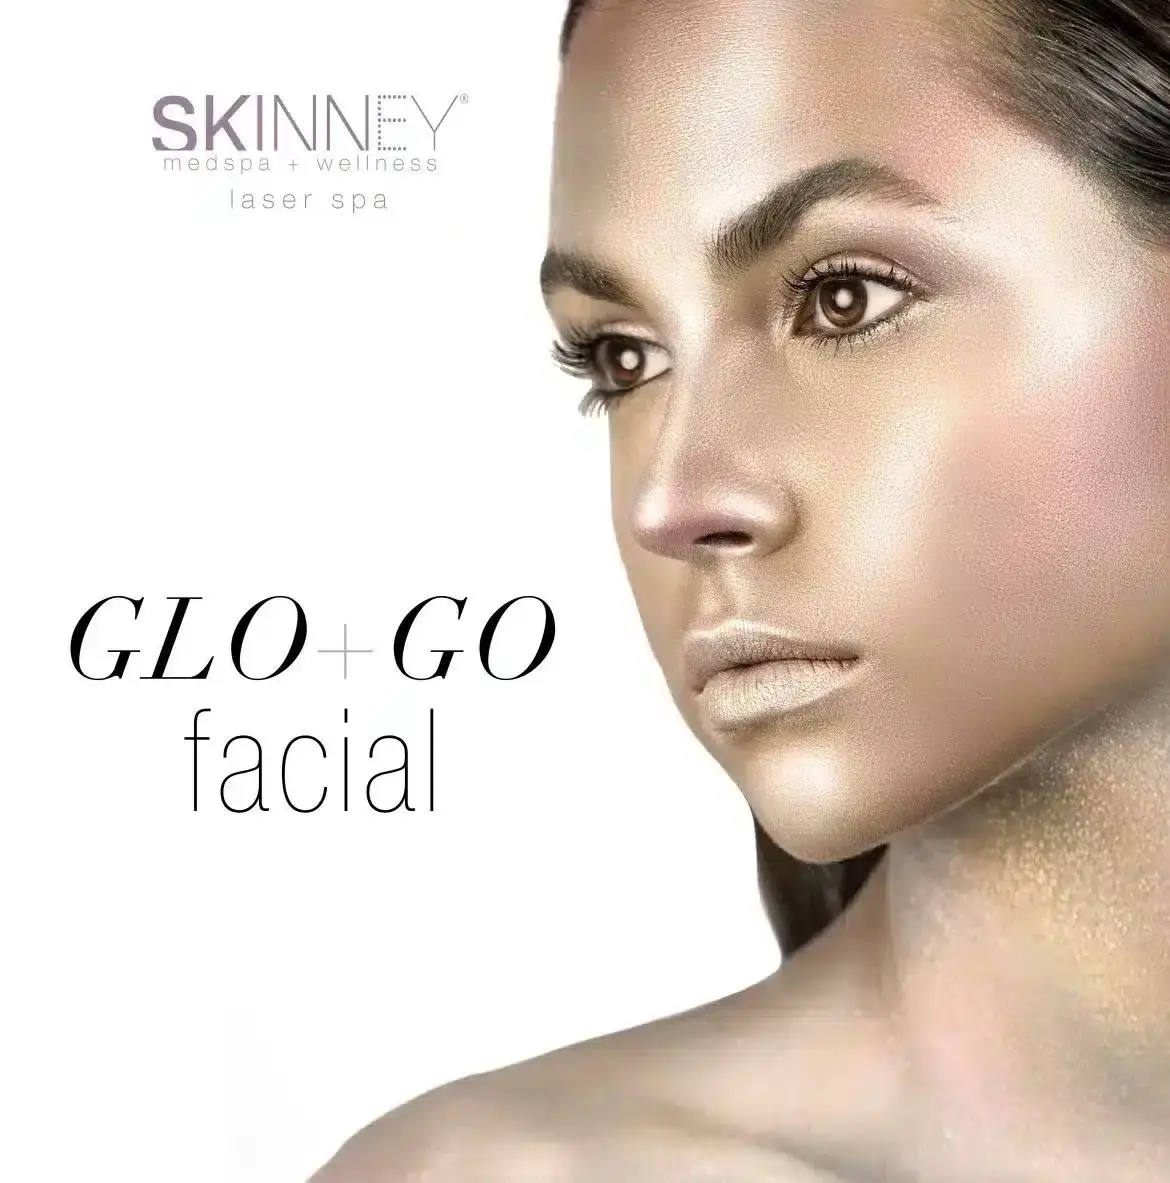 pamper yourself this winter with a GLO + GO facial